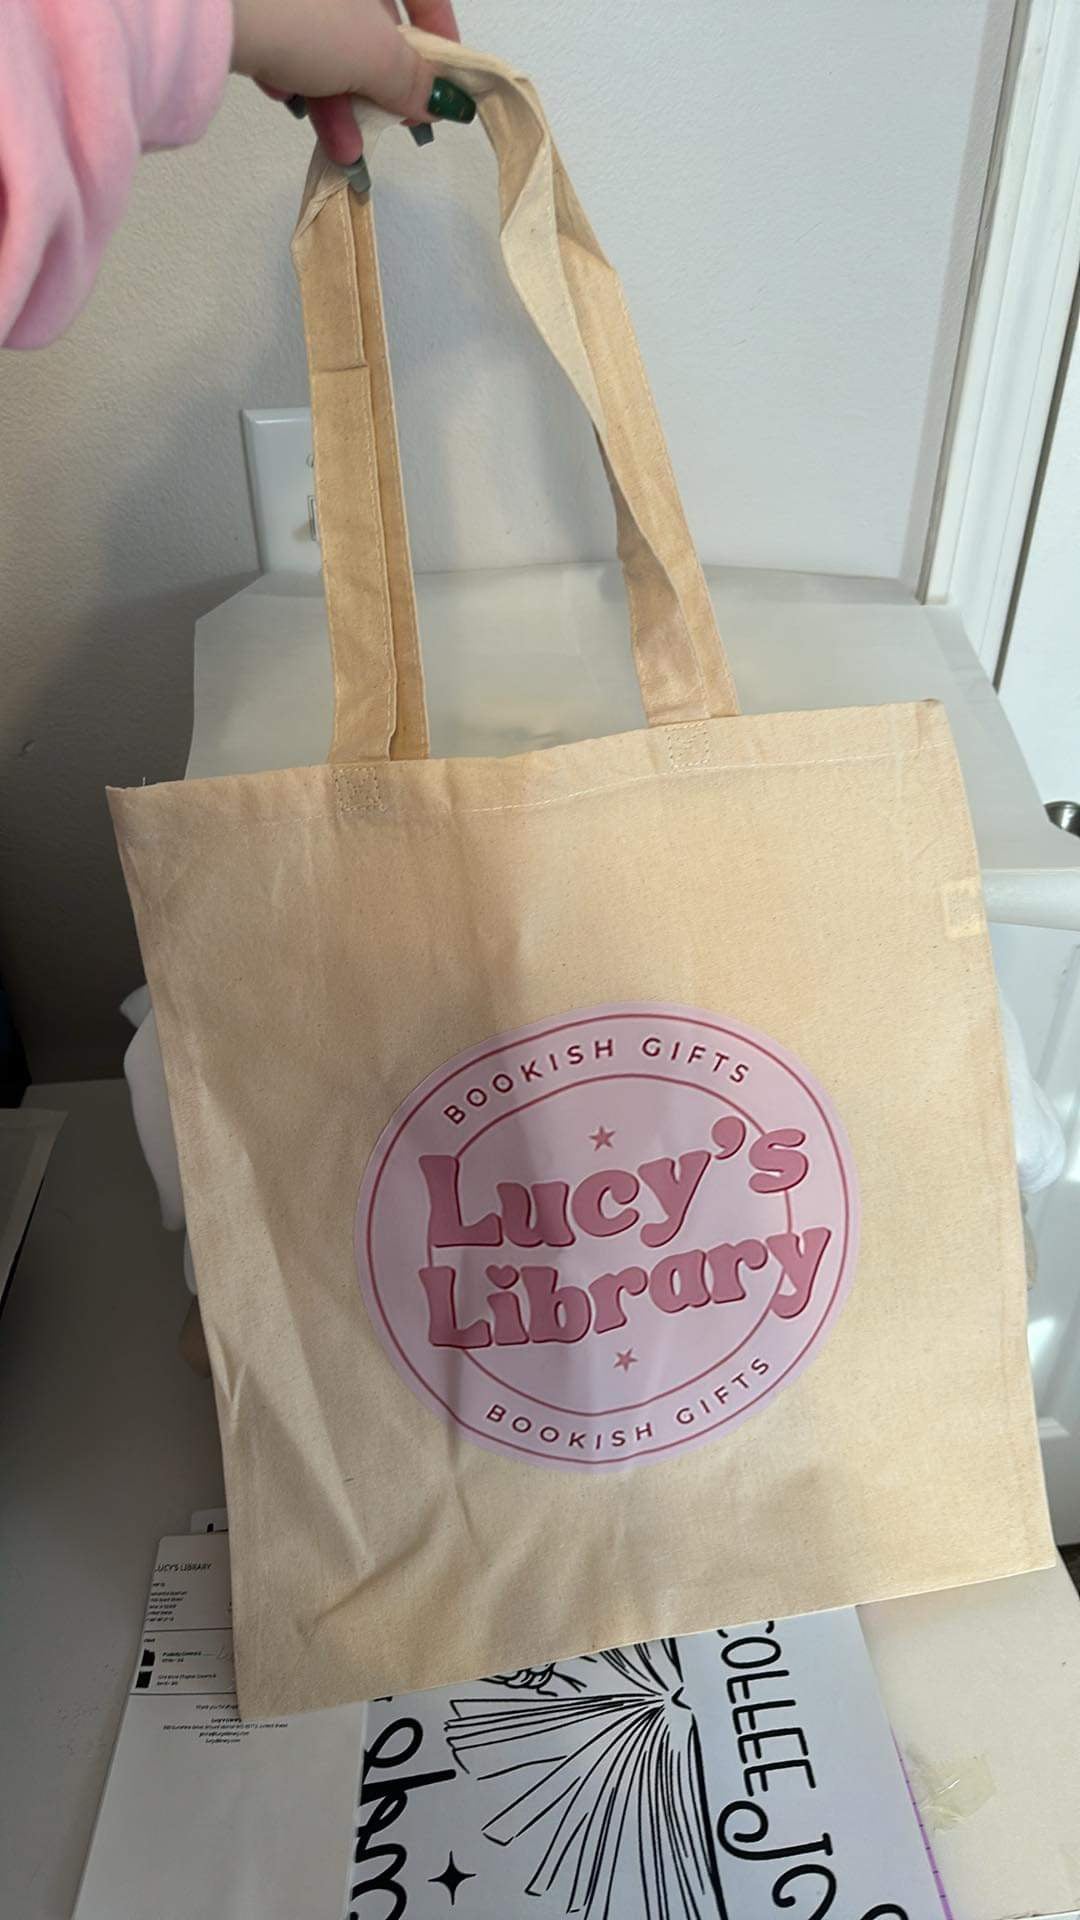 Lucy’s Library Tote